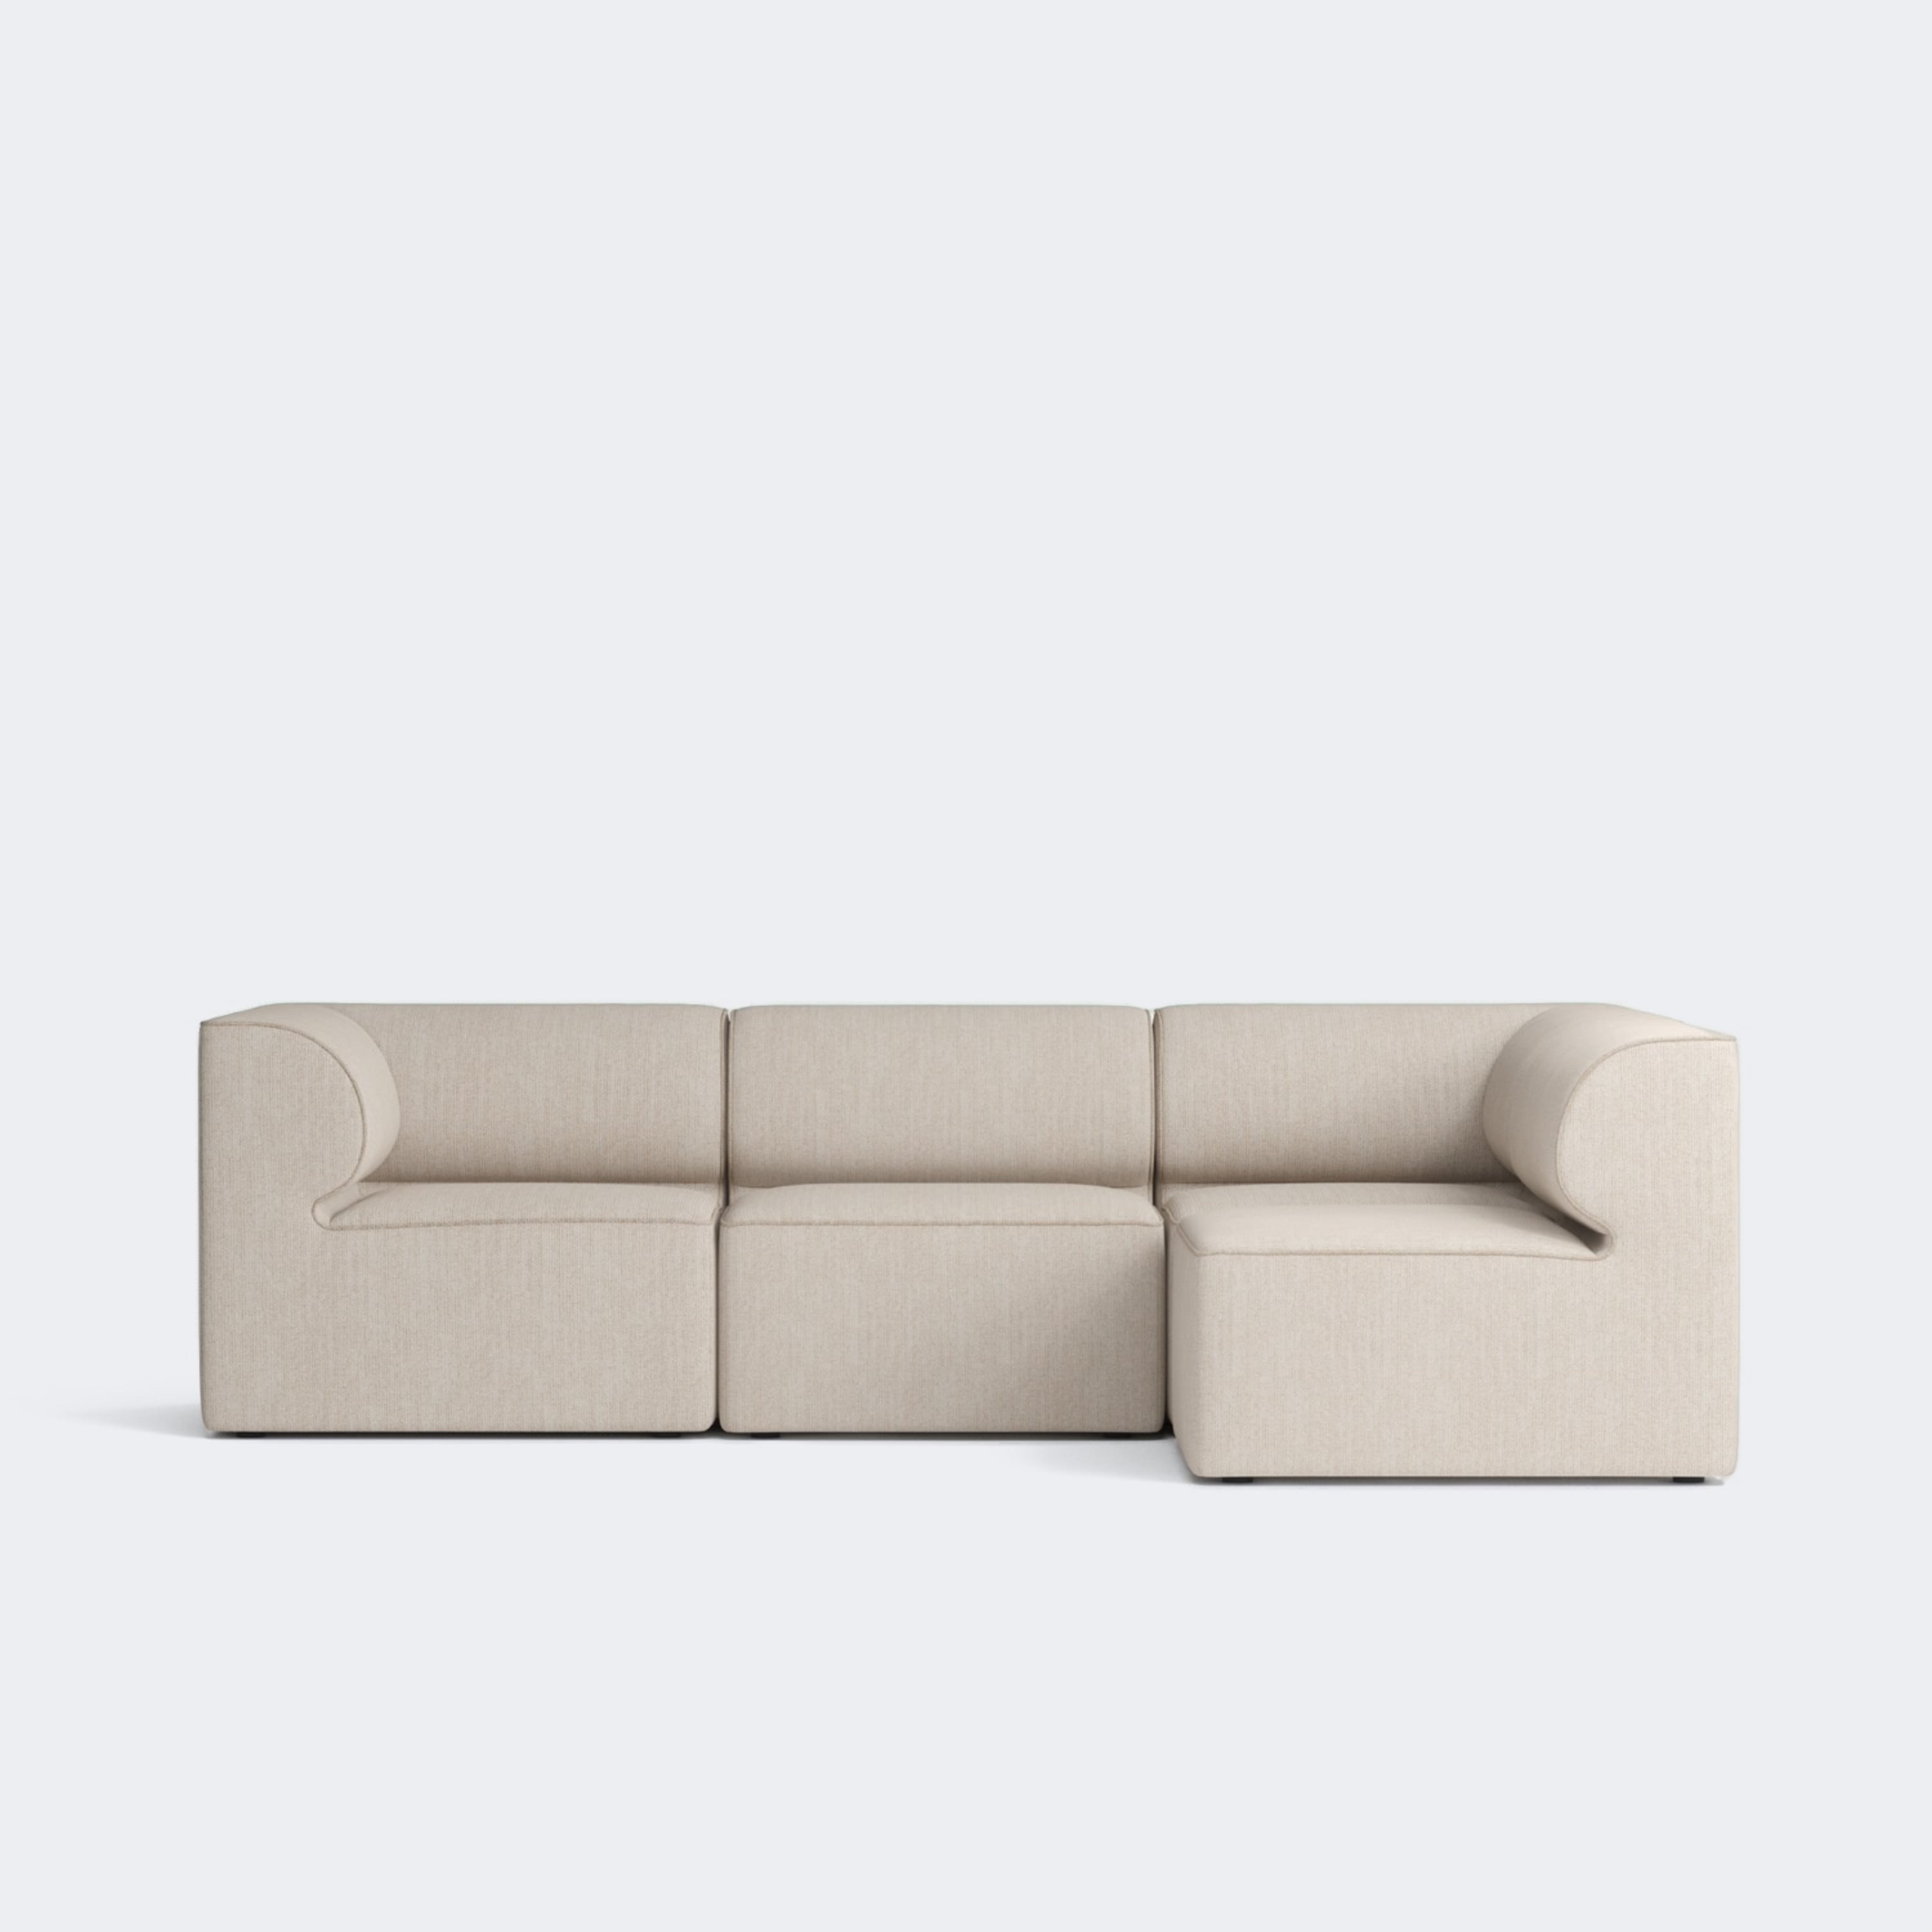 Audo Copenhagen Eave Sectional Sofa, 4-Seater Made To Order (10-12 Weeks) 4-Seater | Right Section Savanna #202 (Cream) - KANSO